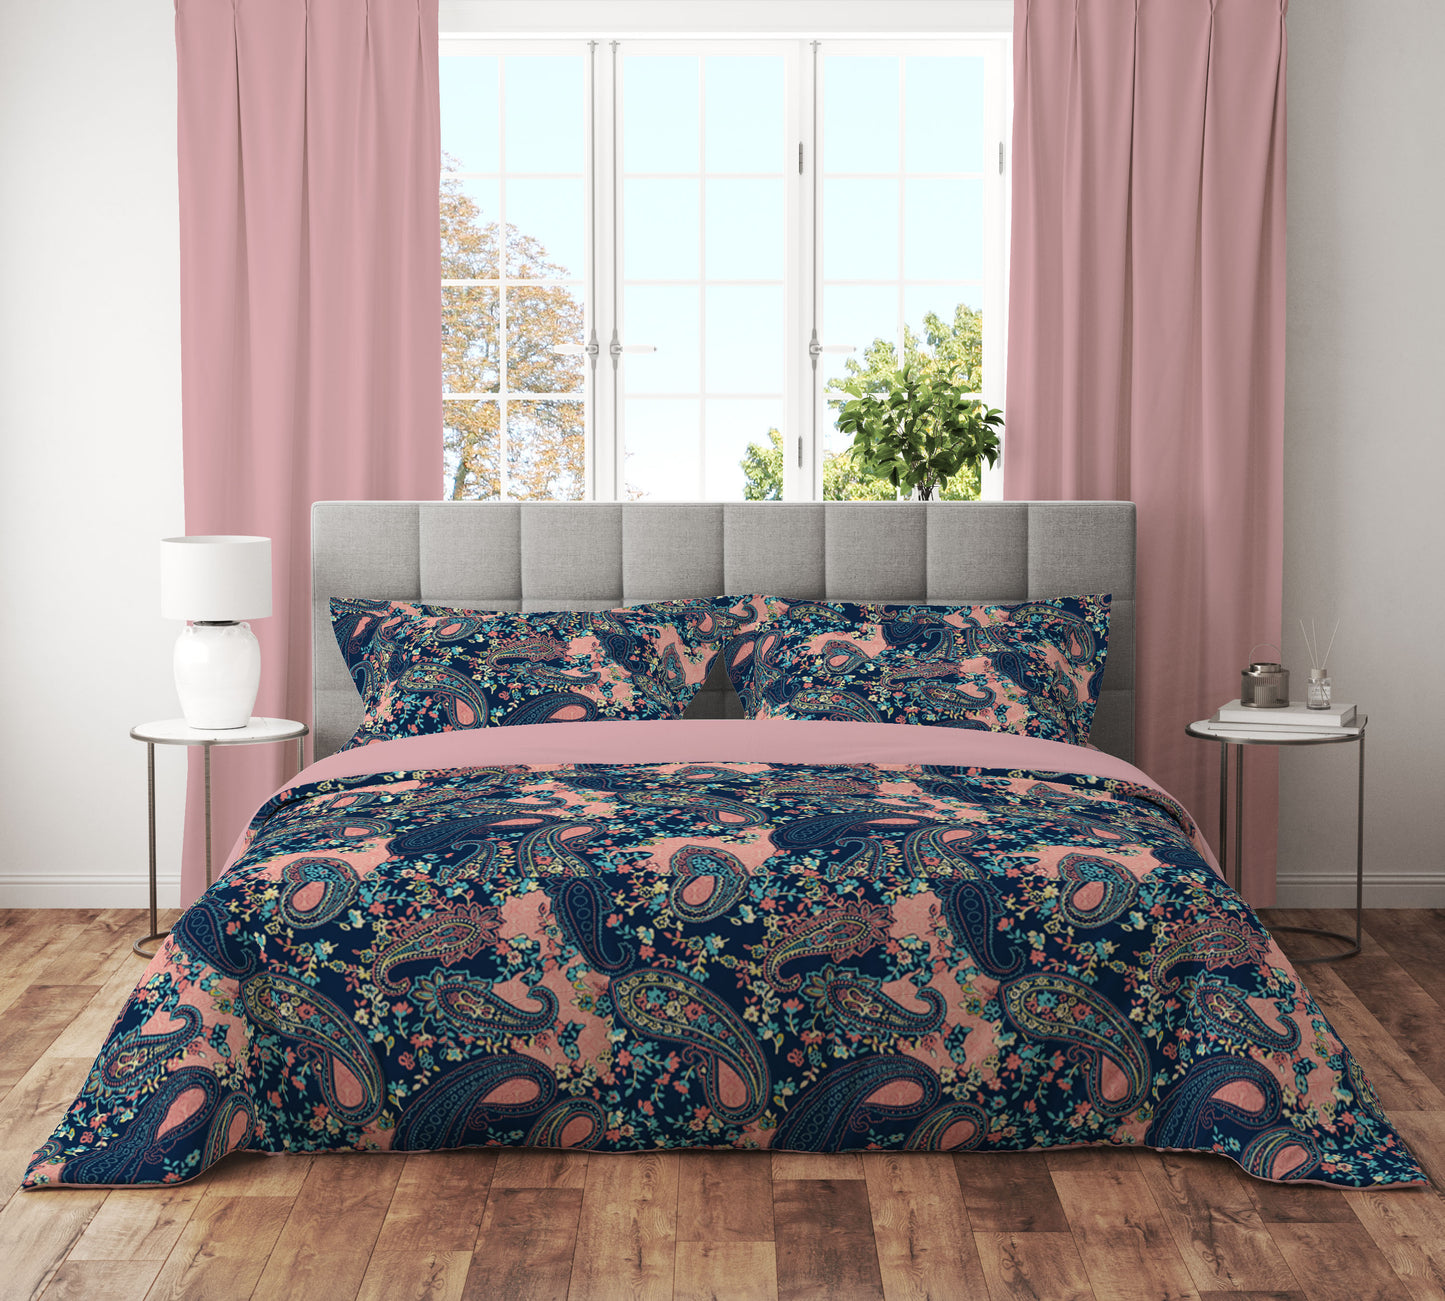 Pink Paisley Bliss Quilt Cover Set - Stylish Comfort for Dreamy Nights